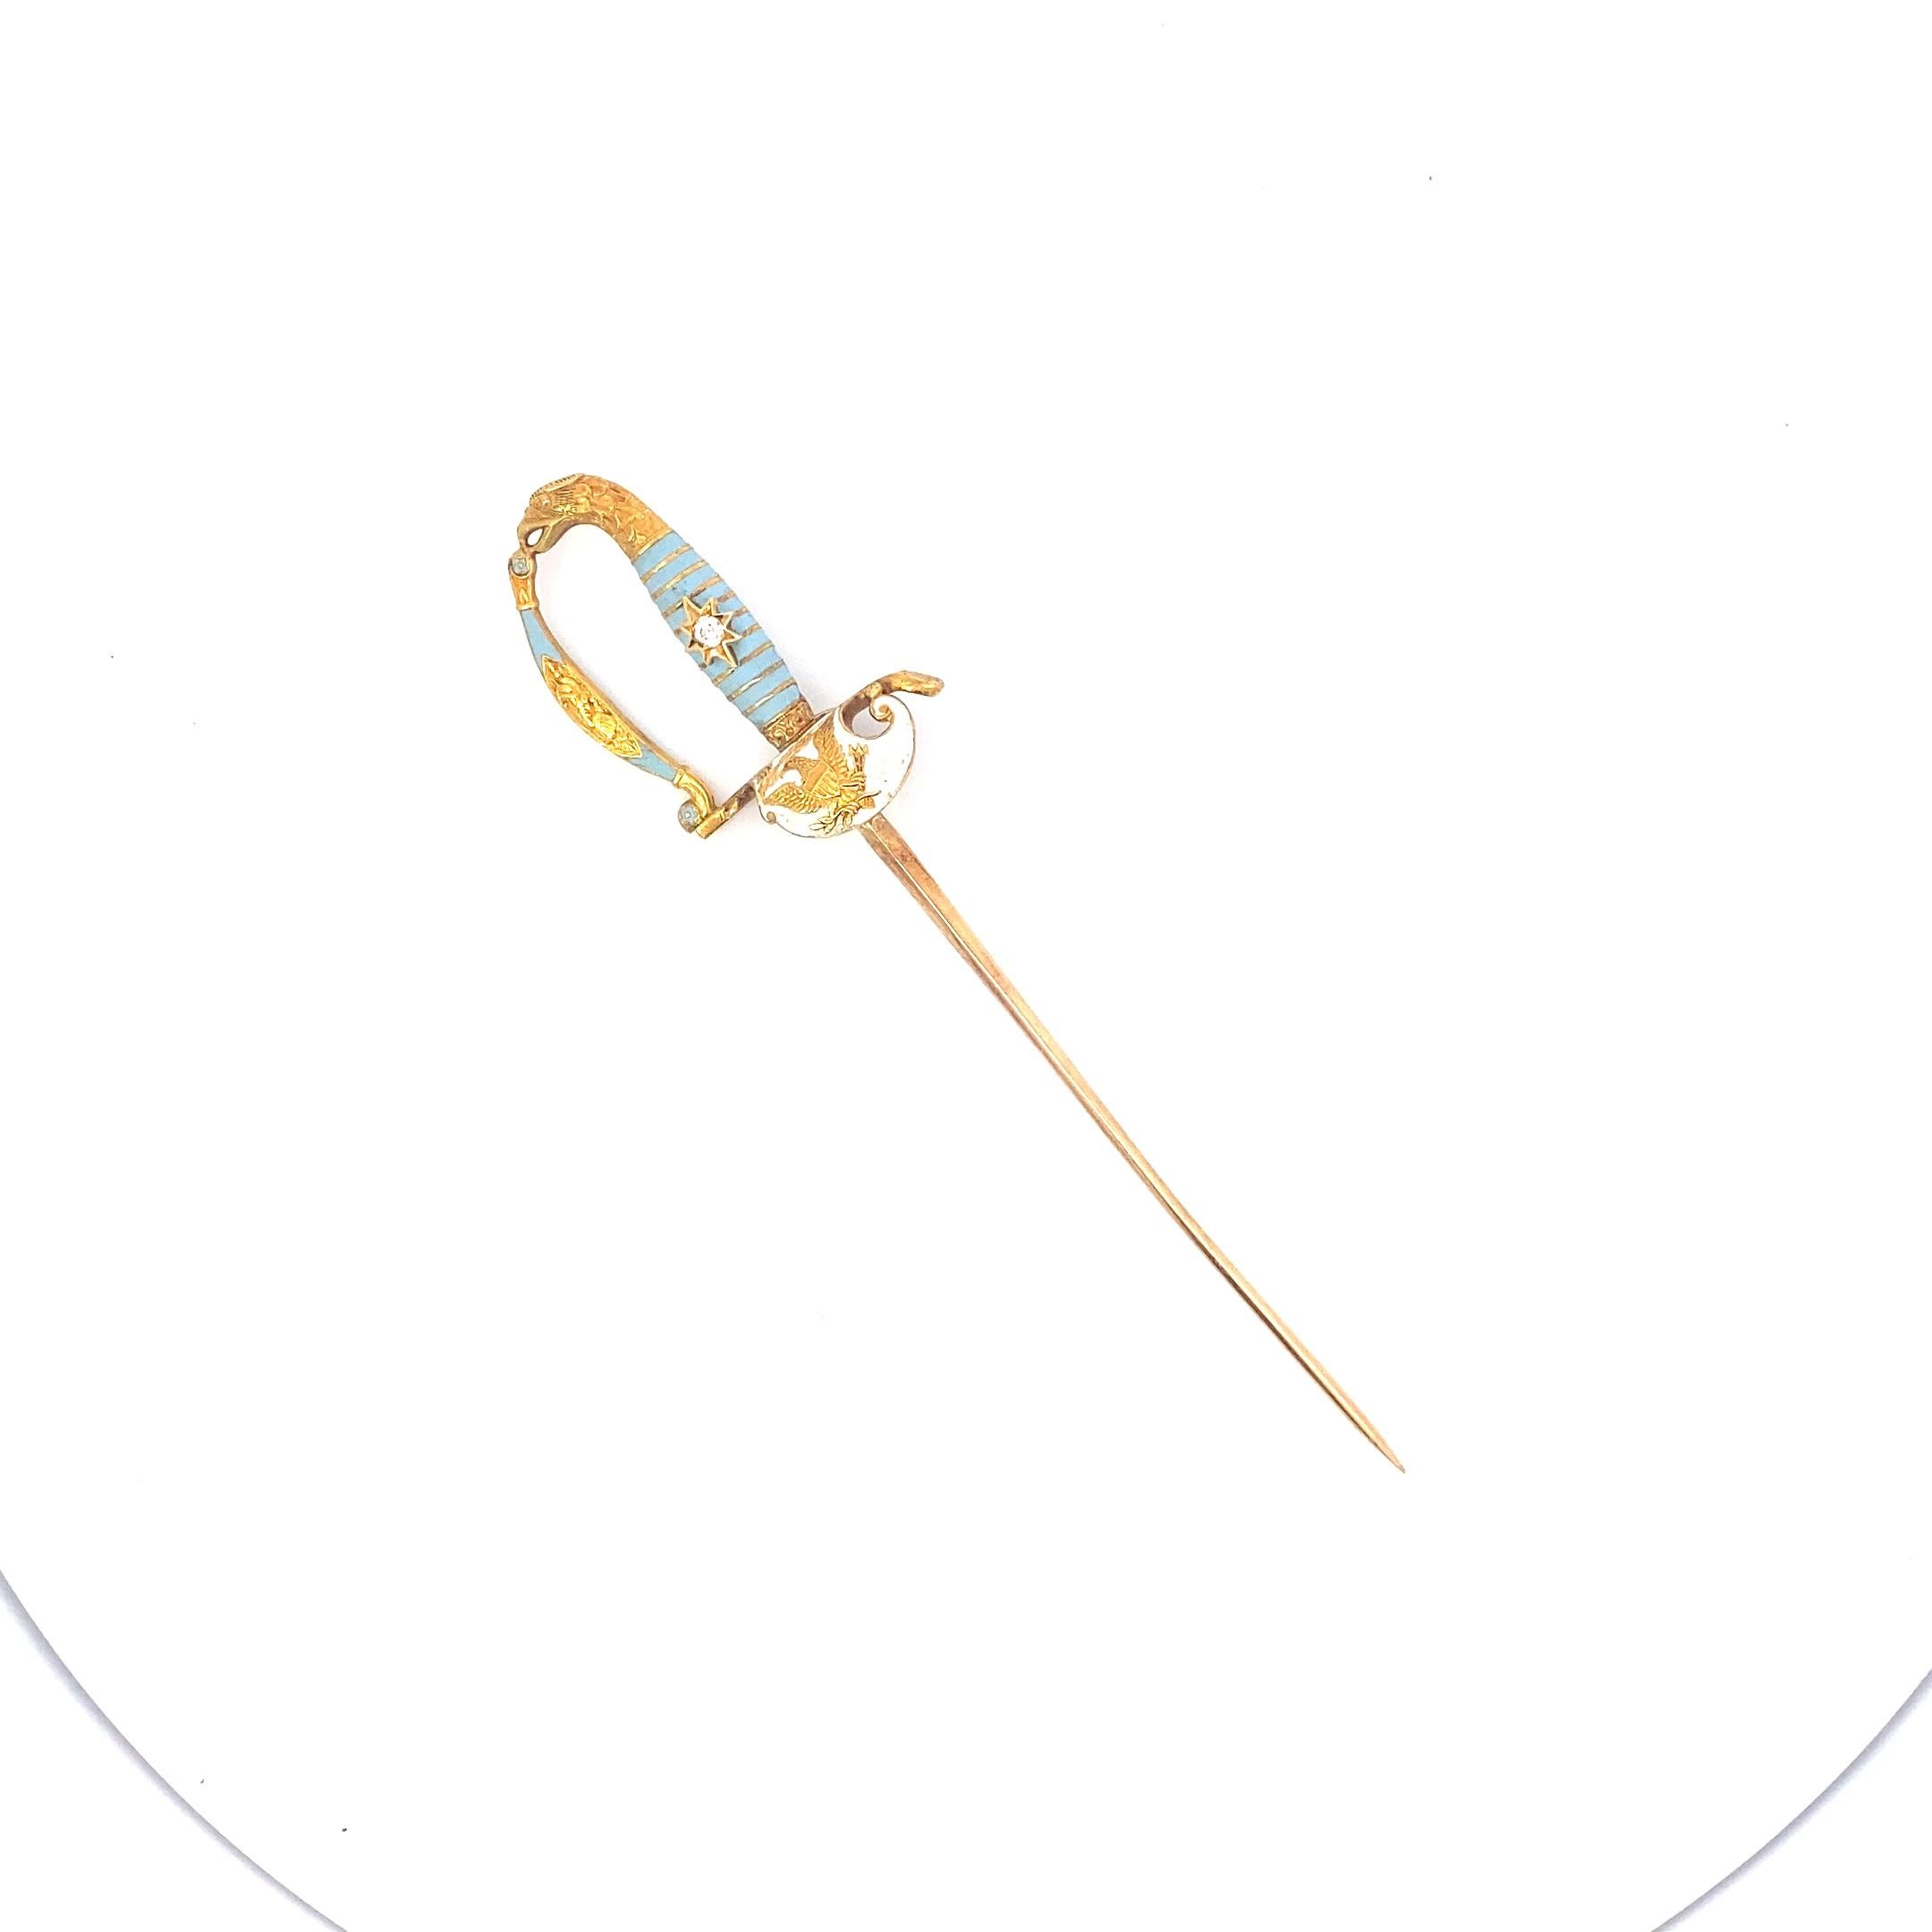 A classic Jabot Pin from the mid-19th century. This one is over four inches of incredible 18k yellow gold craftsmanship. <br />The hilt and accents of the 18k gold jabot are made from a gorgeous teal blue enamel as well as the image of an Eagle. <br